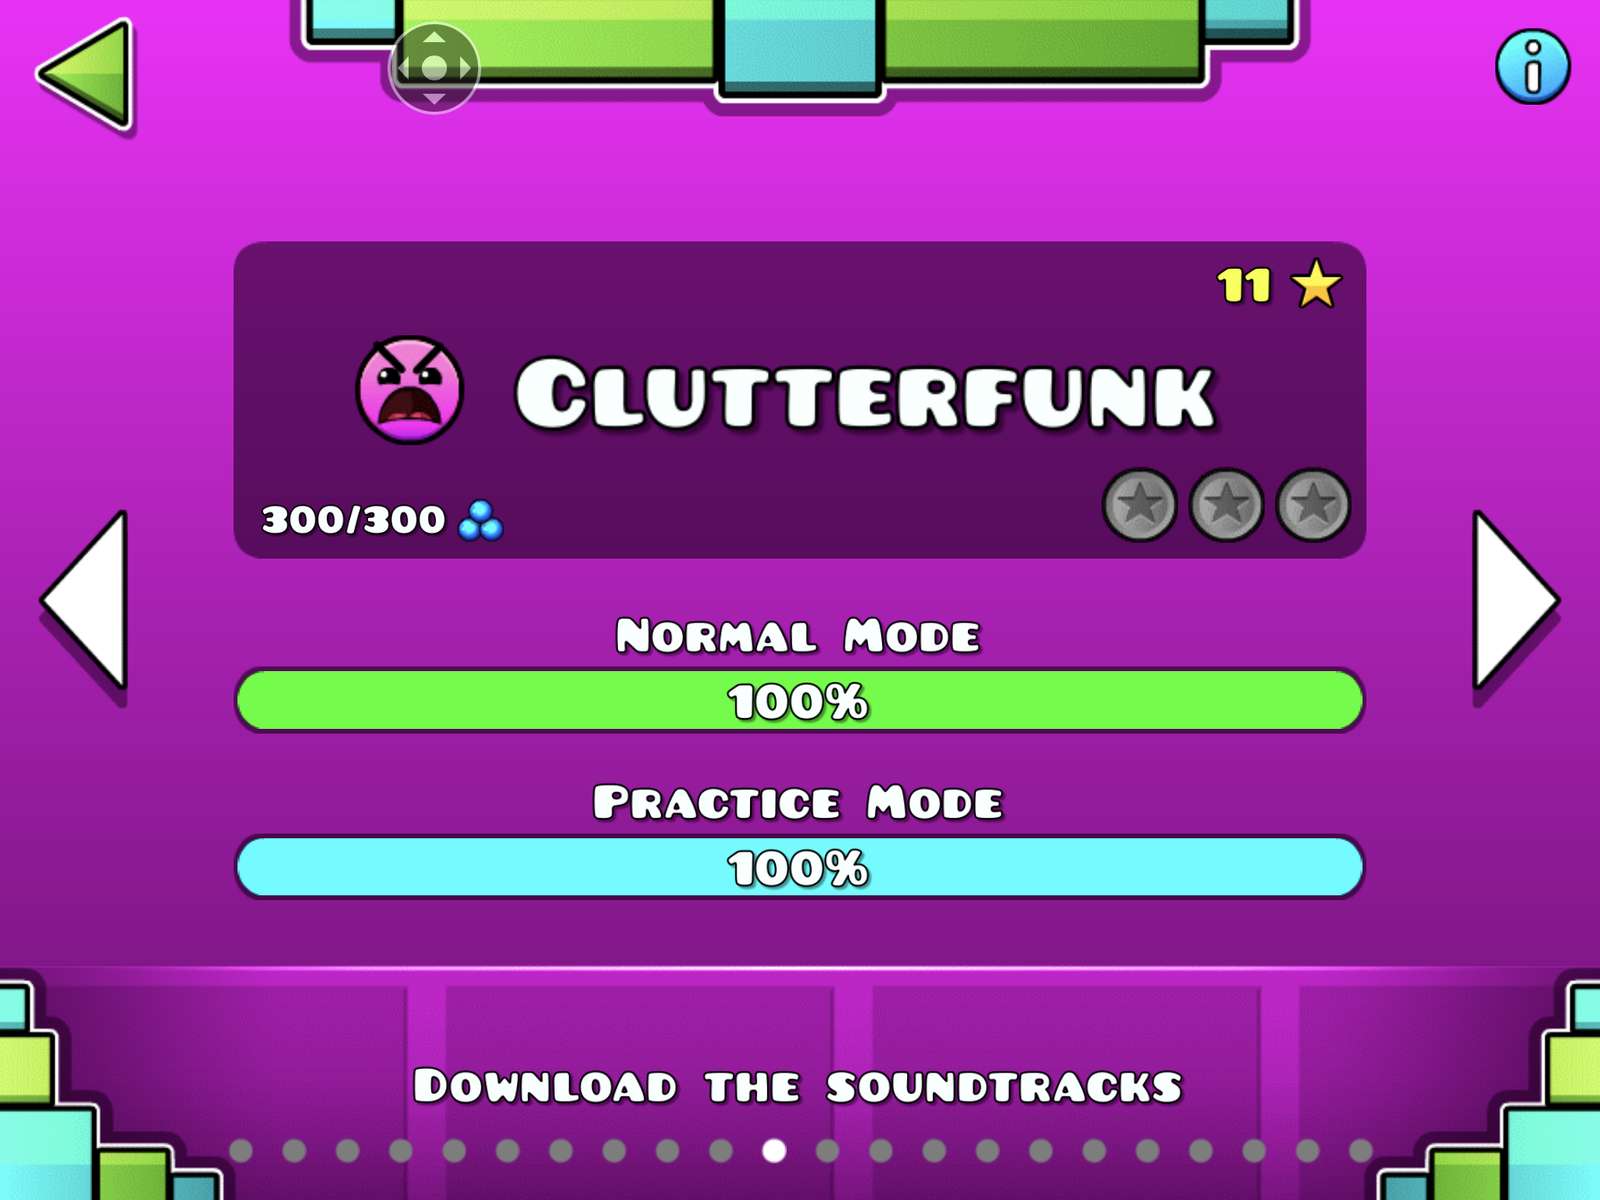 How to clutterfunk online puzzle